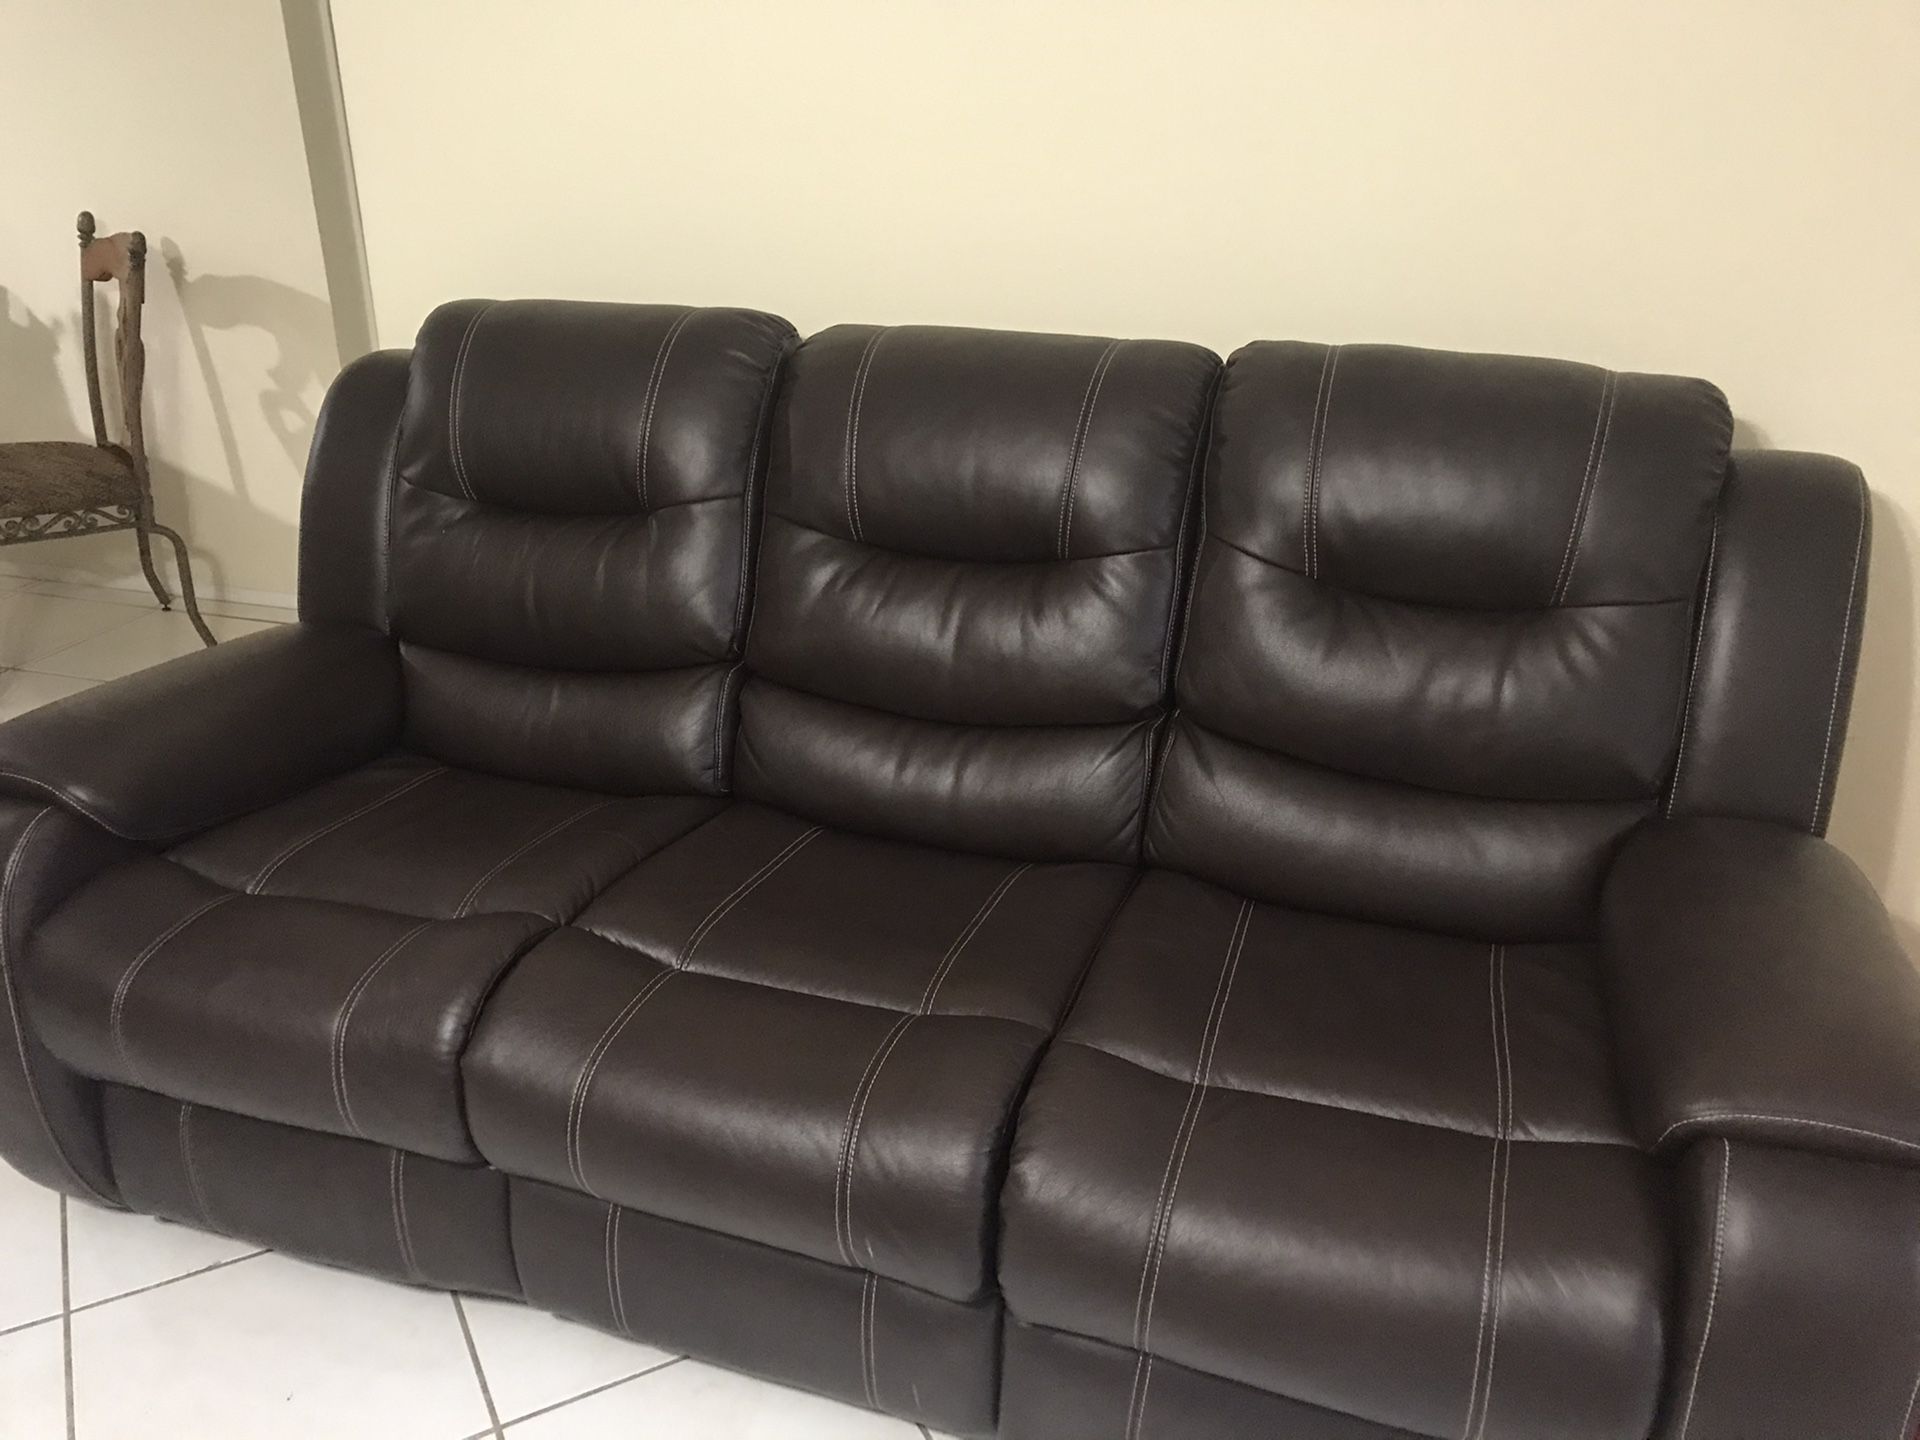 New electrical couch excellent condition